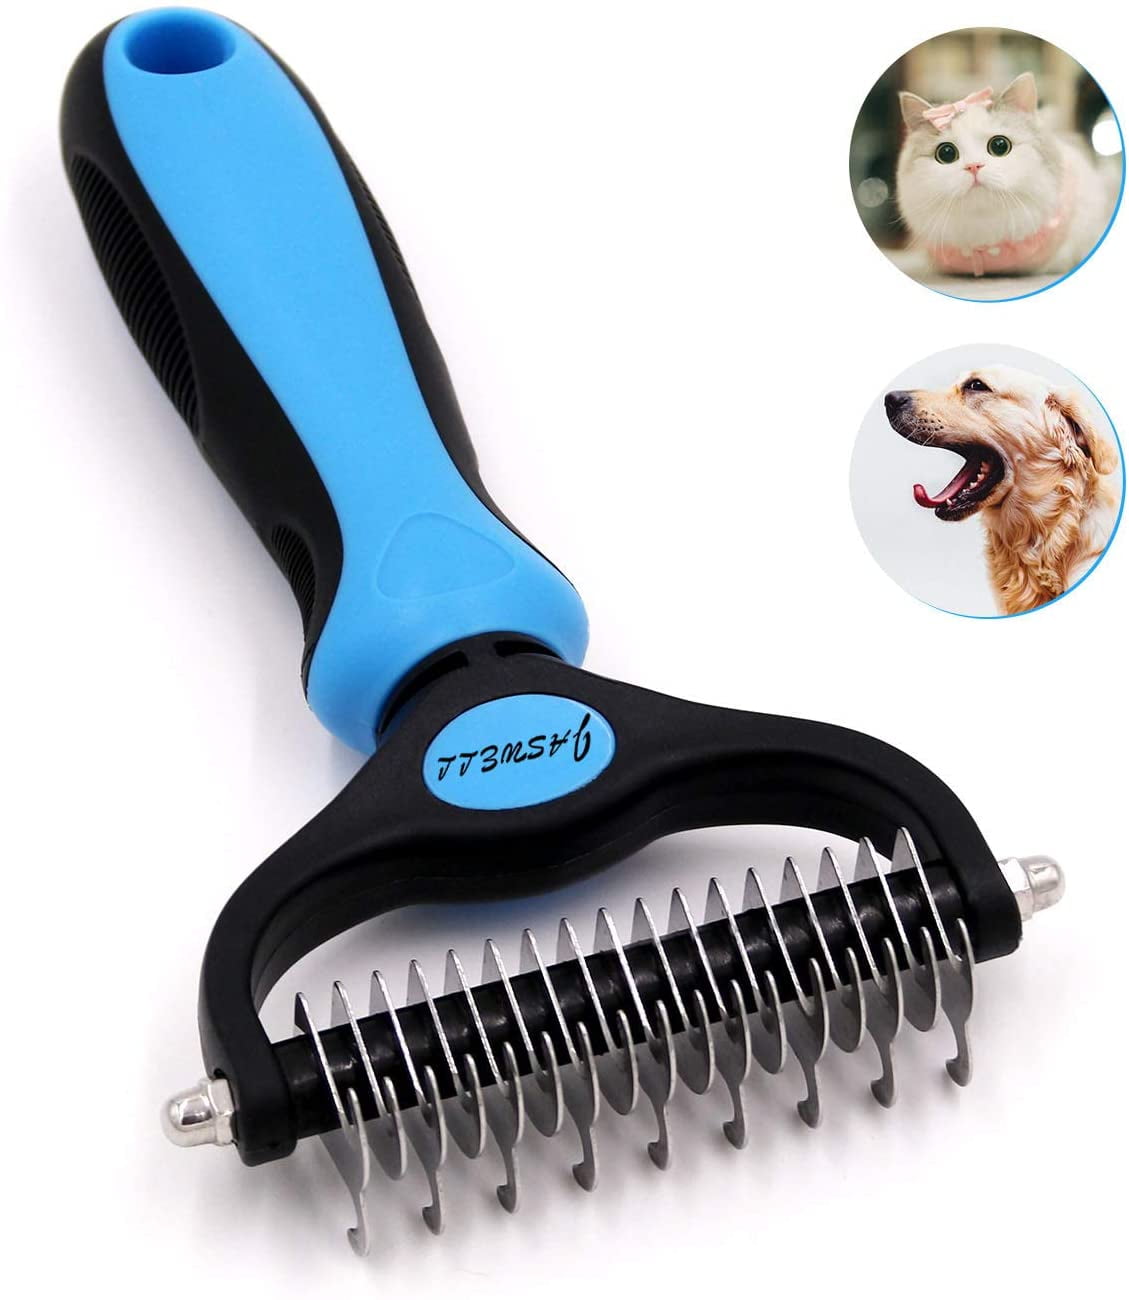 Jinjin Pet Dematting Comb Dog Cat Hair Automatic Hair Removal Lightweight Comb Professional Grooming Tool Efficiently Brush Off Mats Tangles Shedding Hair